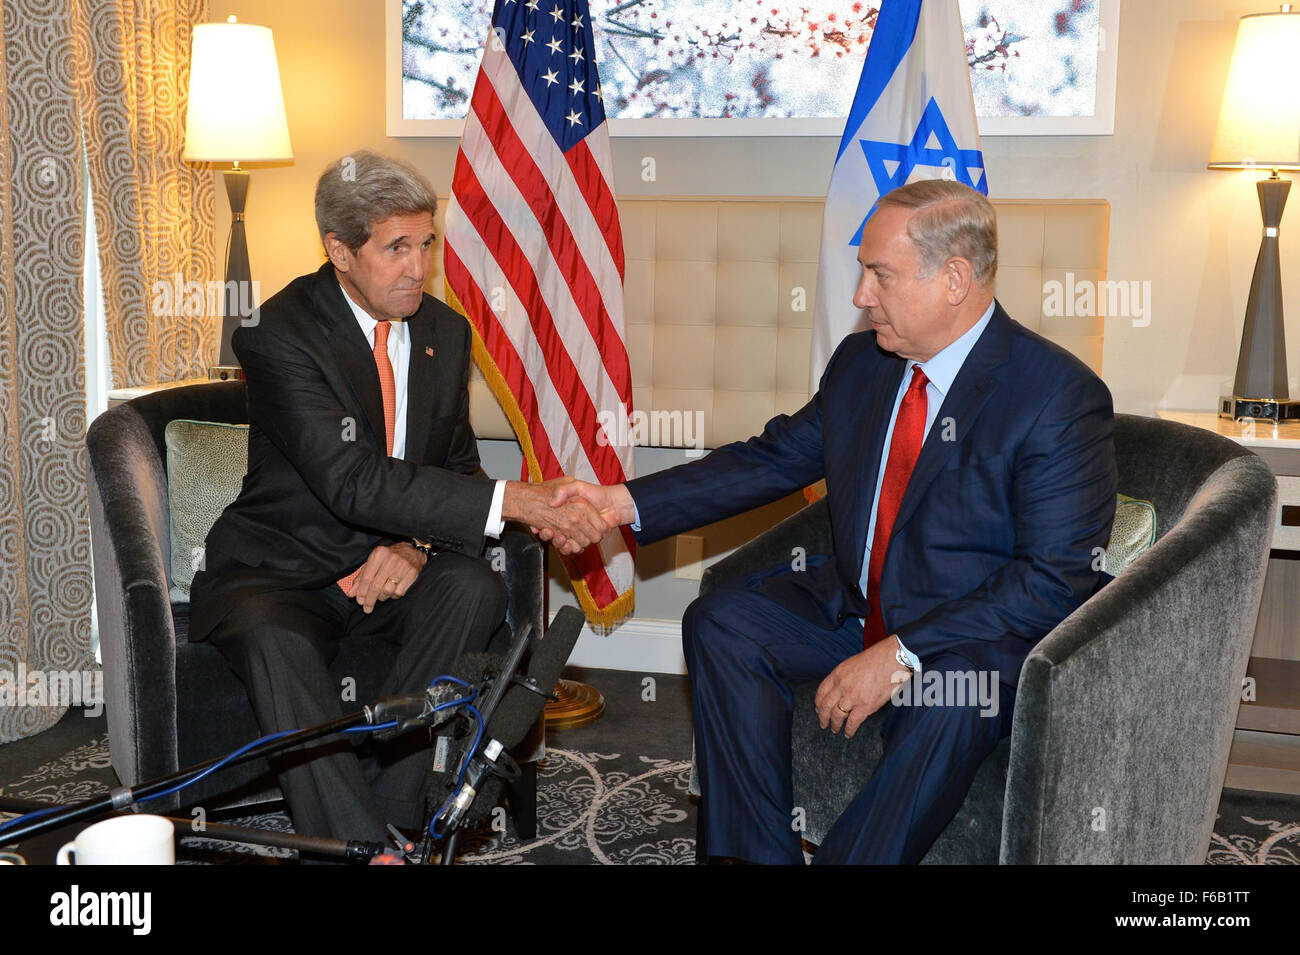 Secretary Kerry Shakes Hands With Israeli Prime Minister Netanyahu Before Their Meeting in New York City Stock Photo